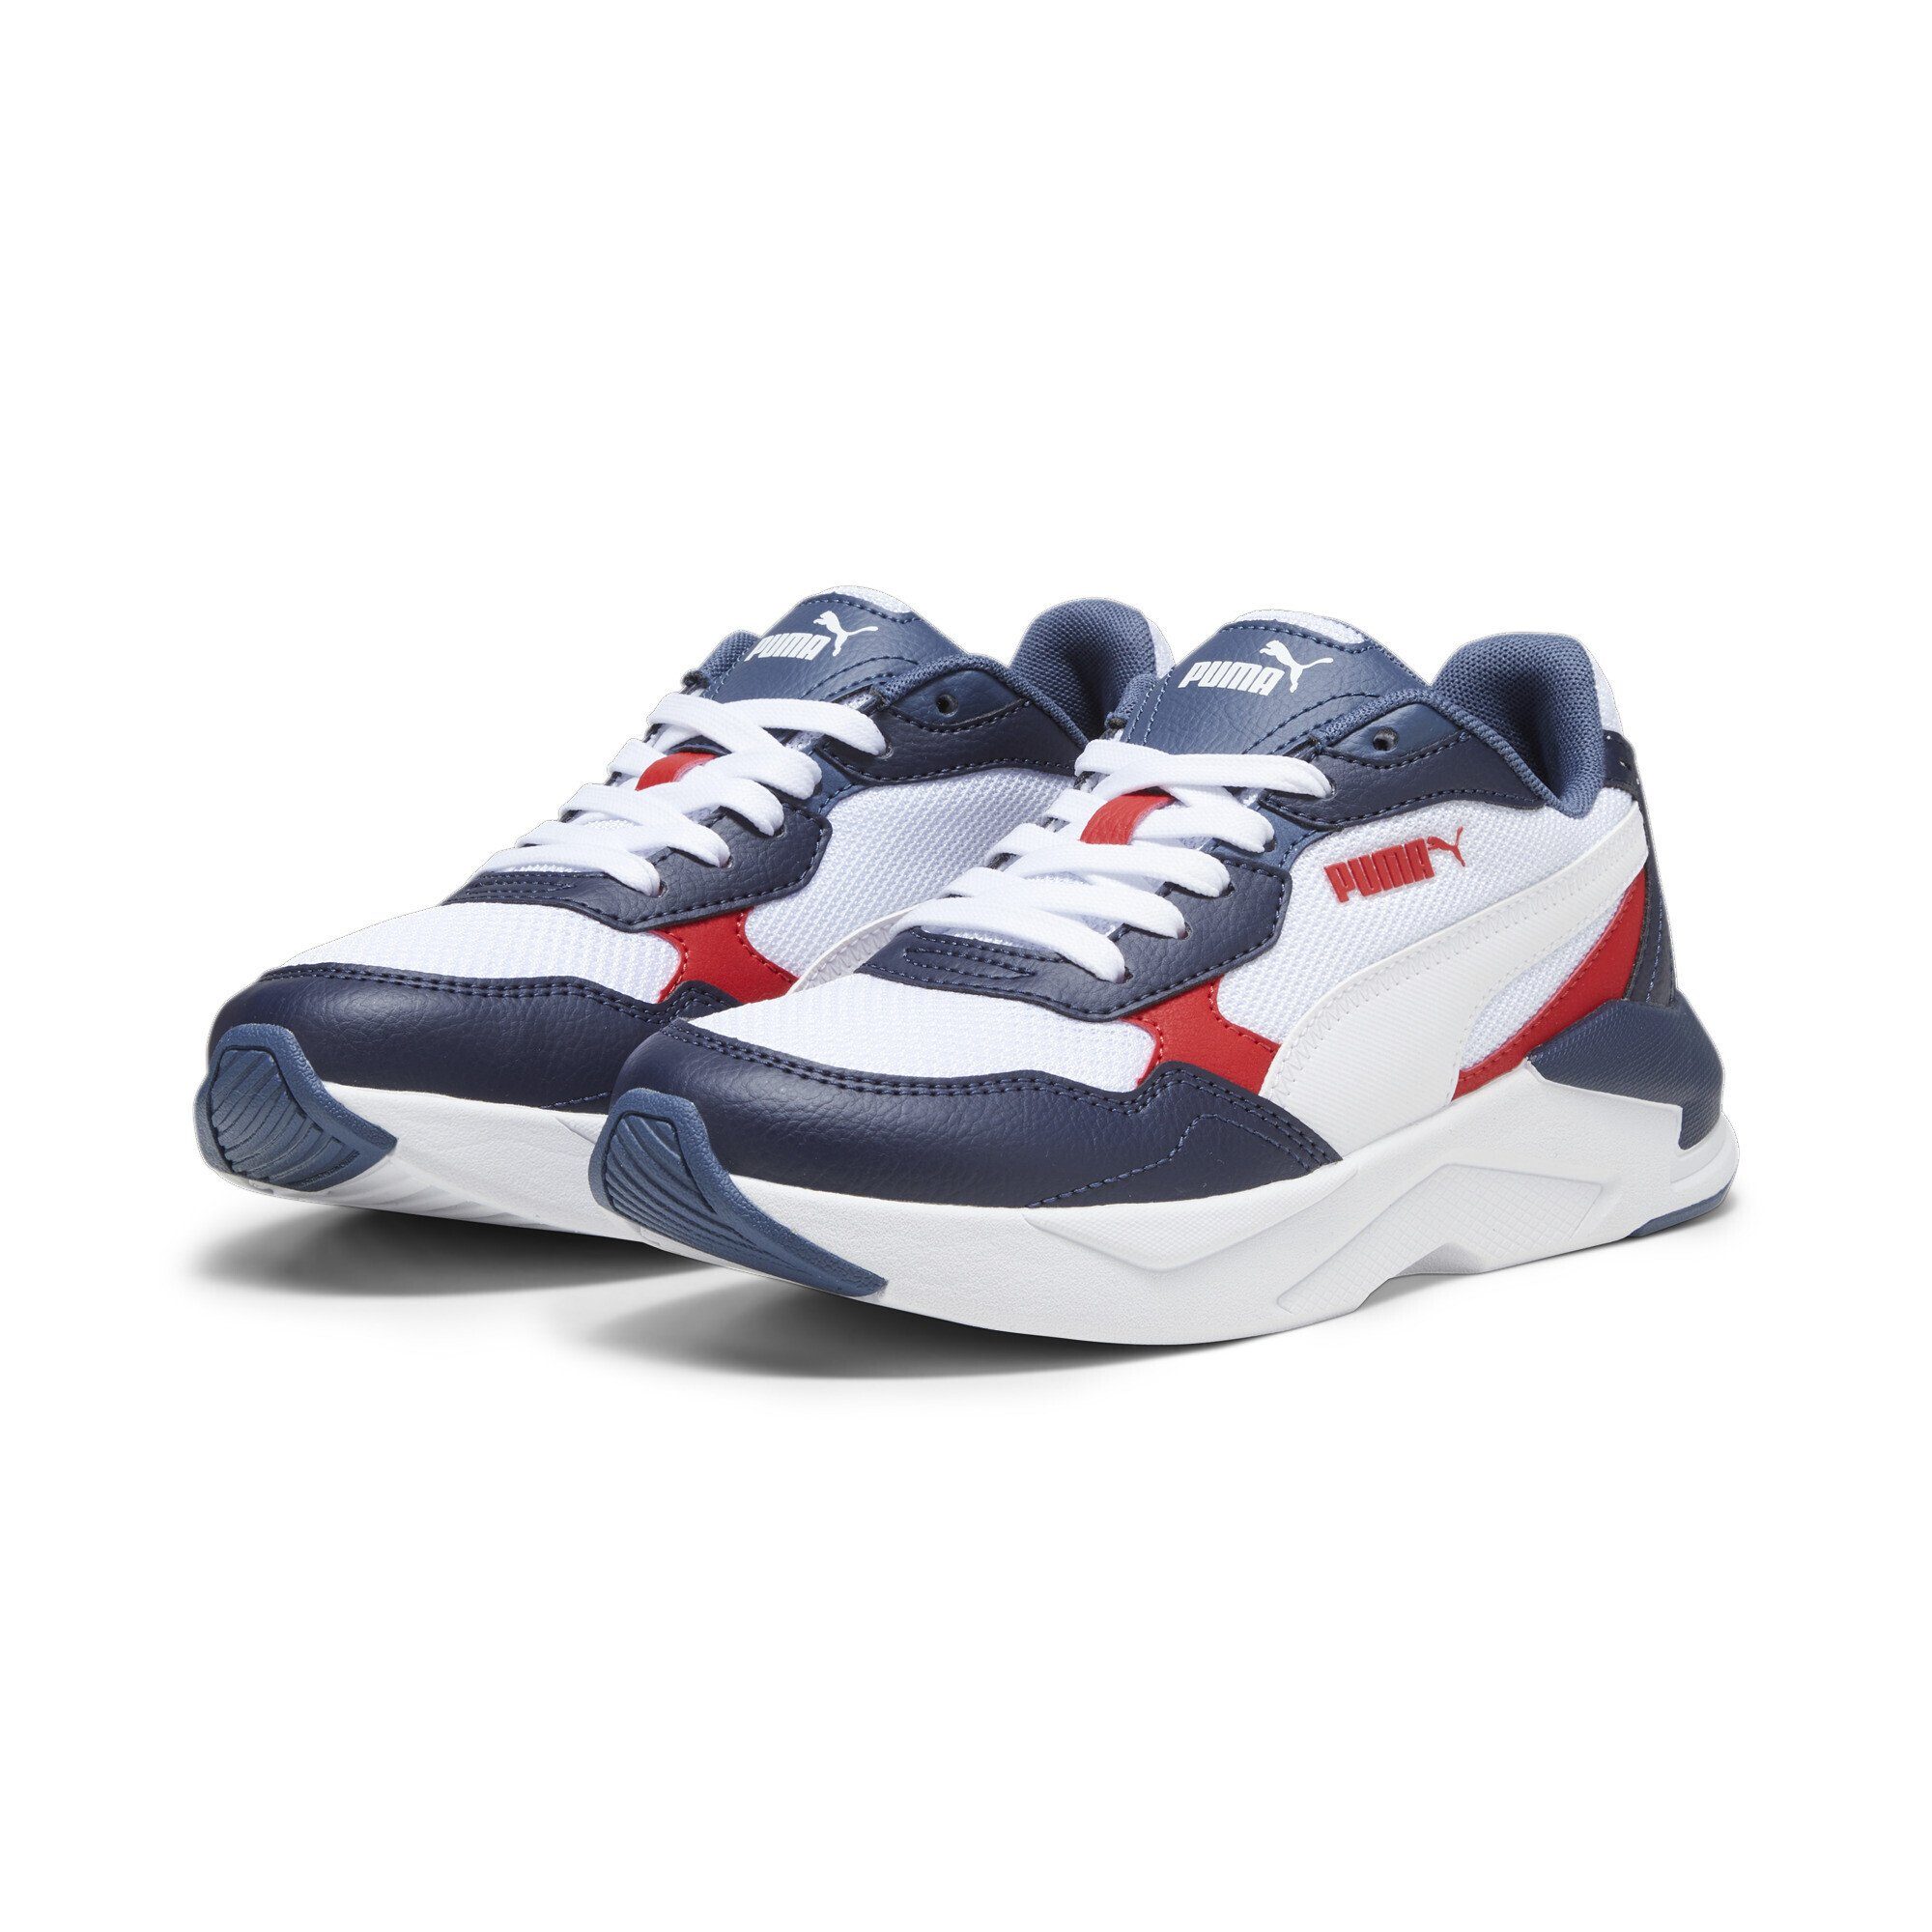 PUMA X-Ray Speed Lite Sneakers Jugendliche Sneaker Navy White For All Time Red Inky Blue